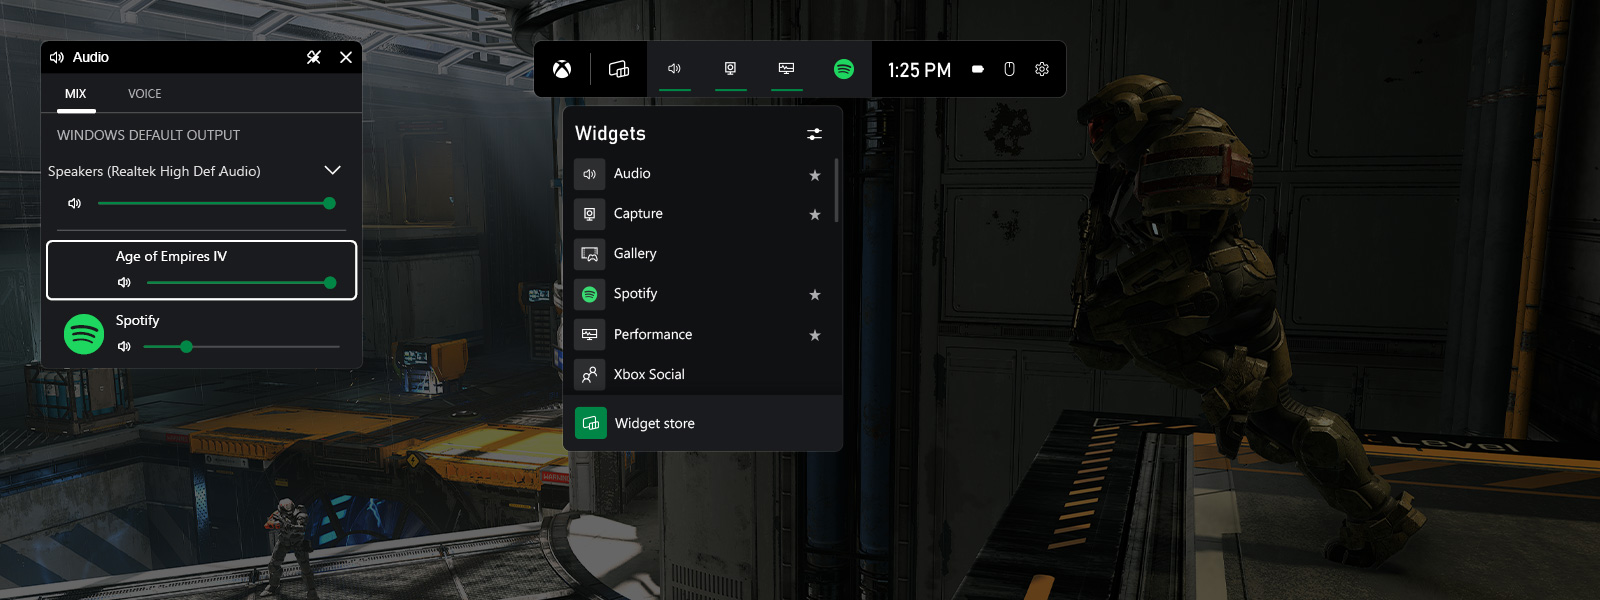 Screenshot of the Xbox dash showing friends list and Looking for Group search